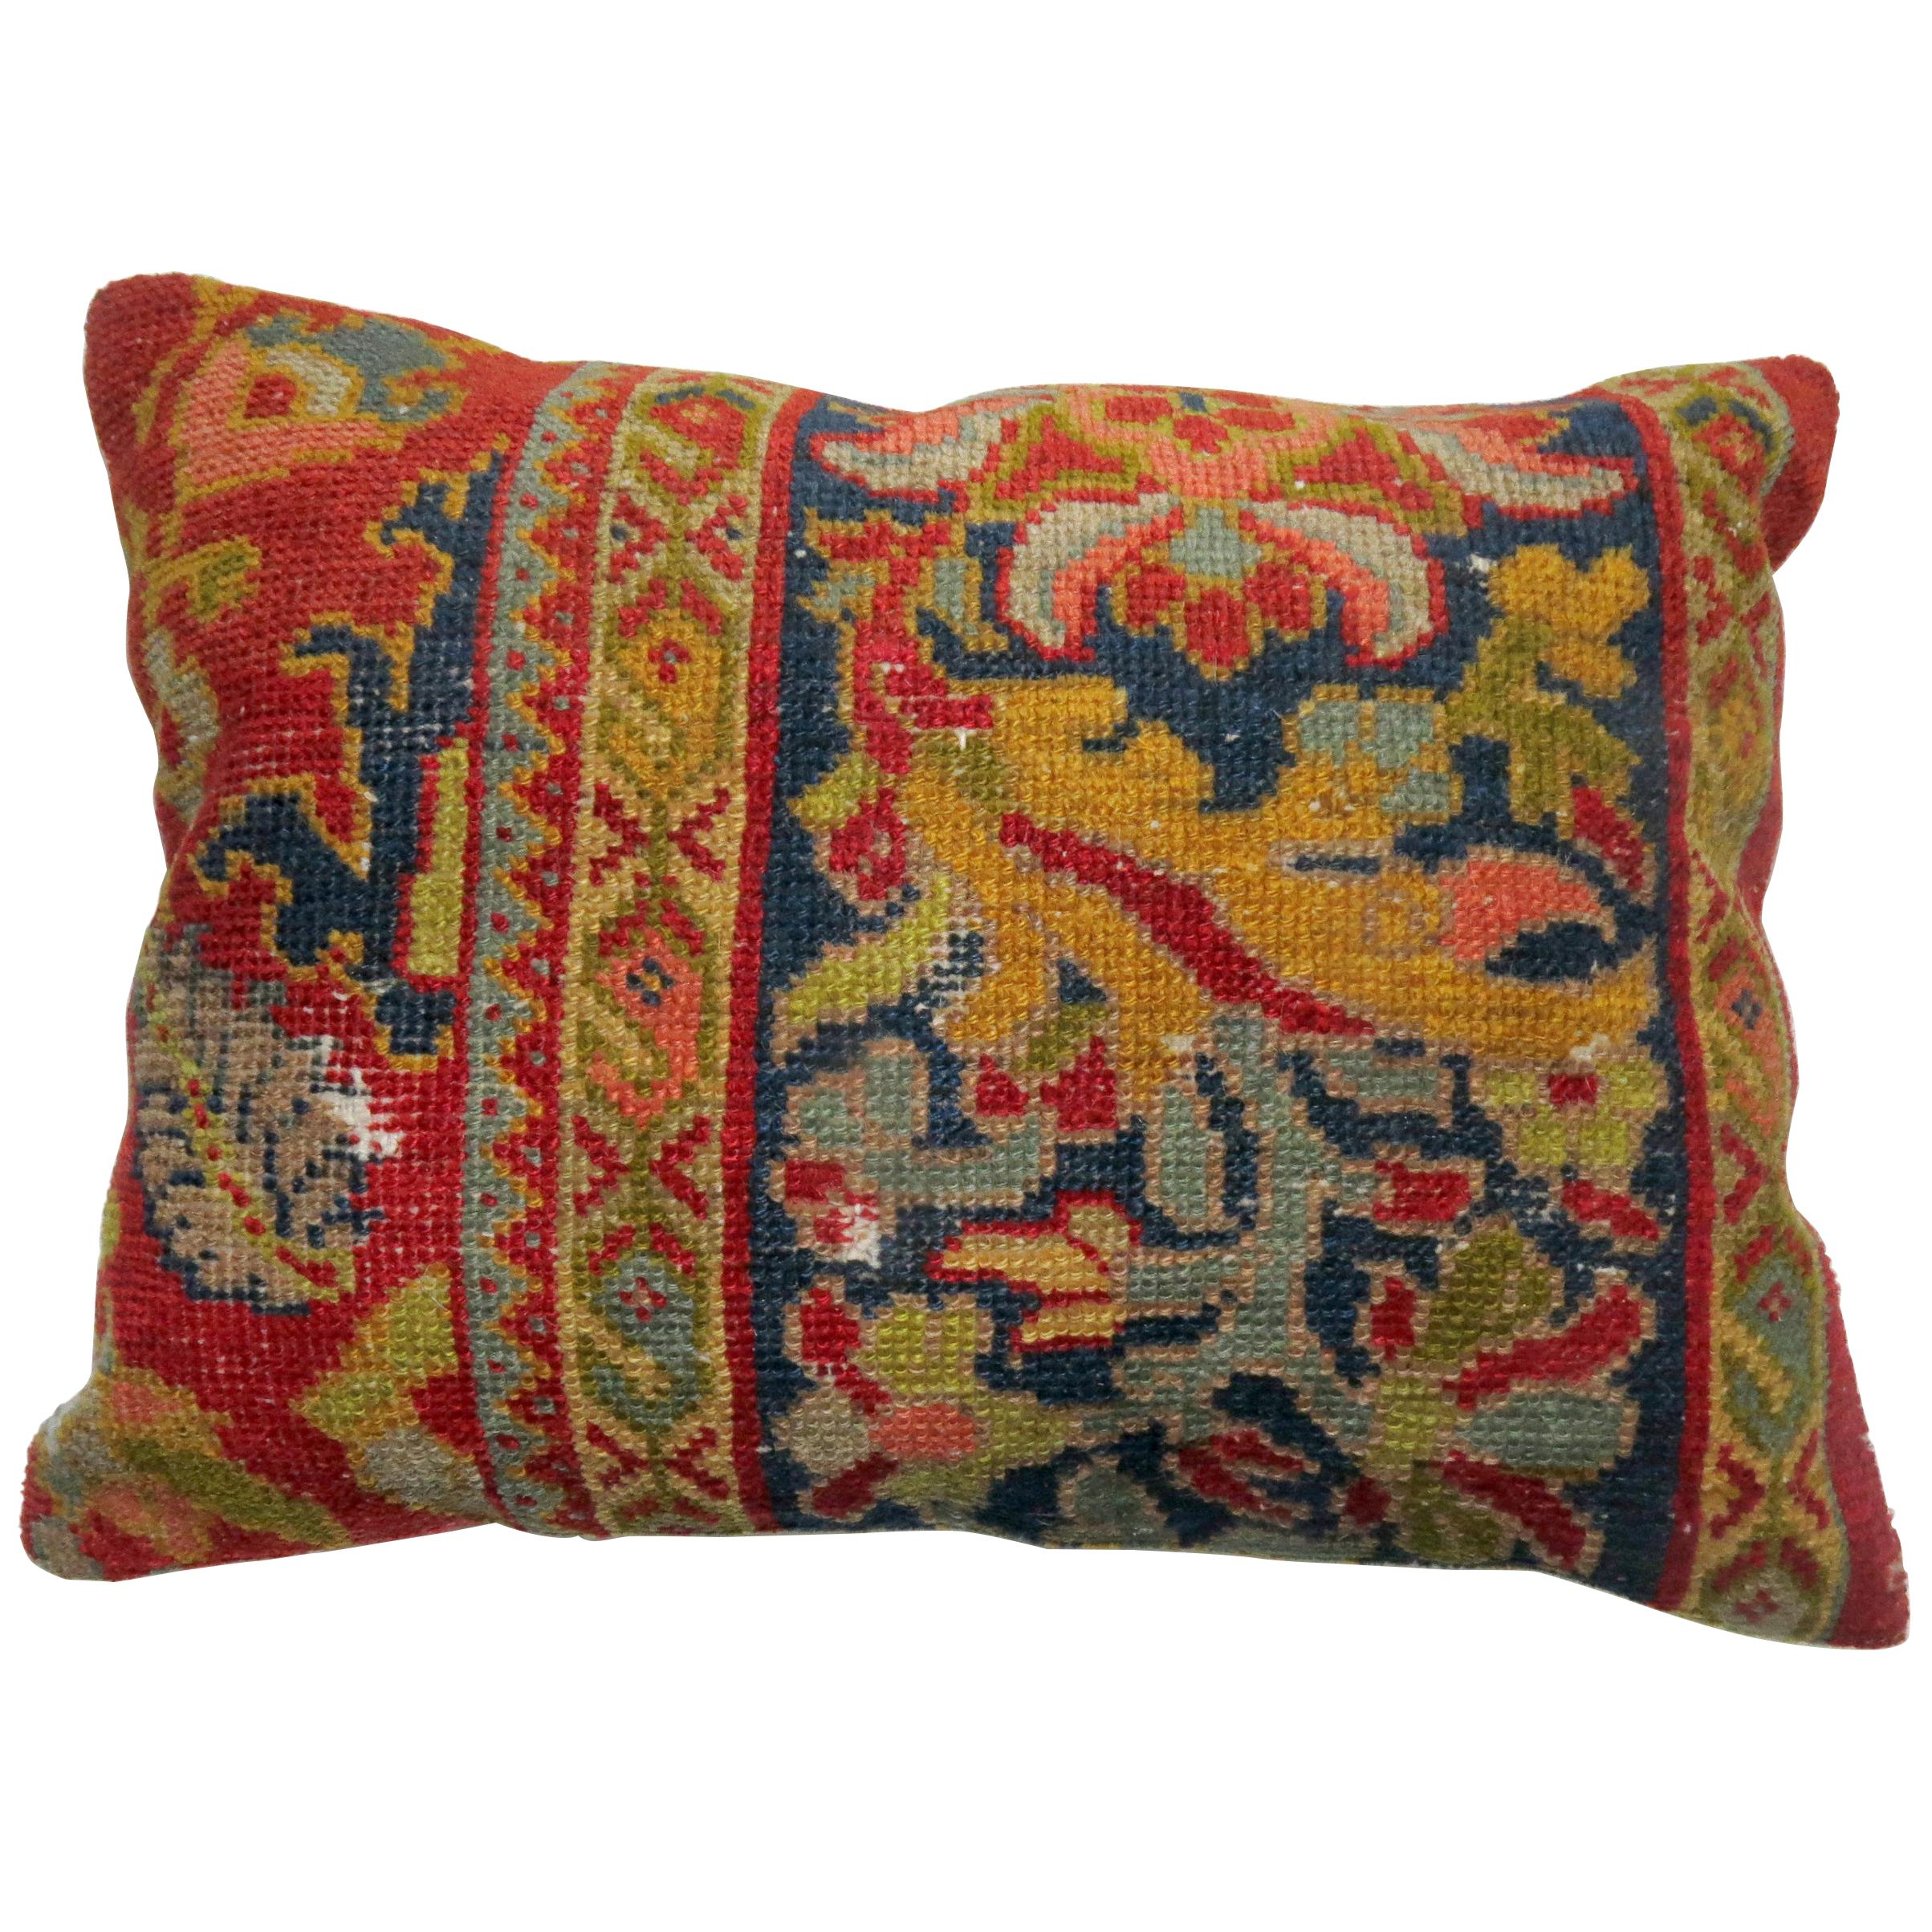 Pillow made from antique Persian Sultanabad rug with red cotton back.

1'4'' x 1'9''